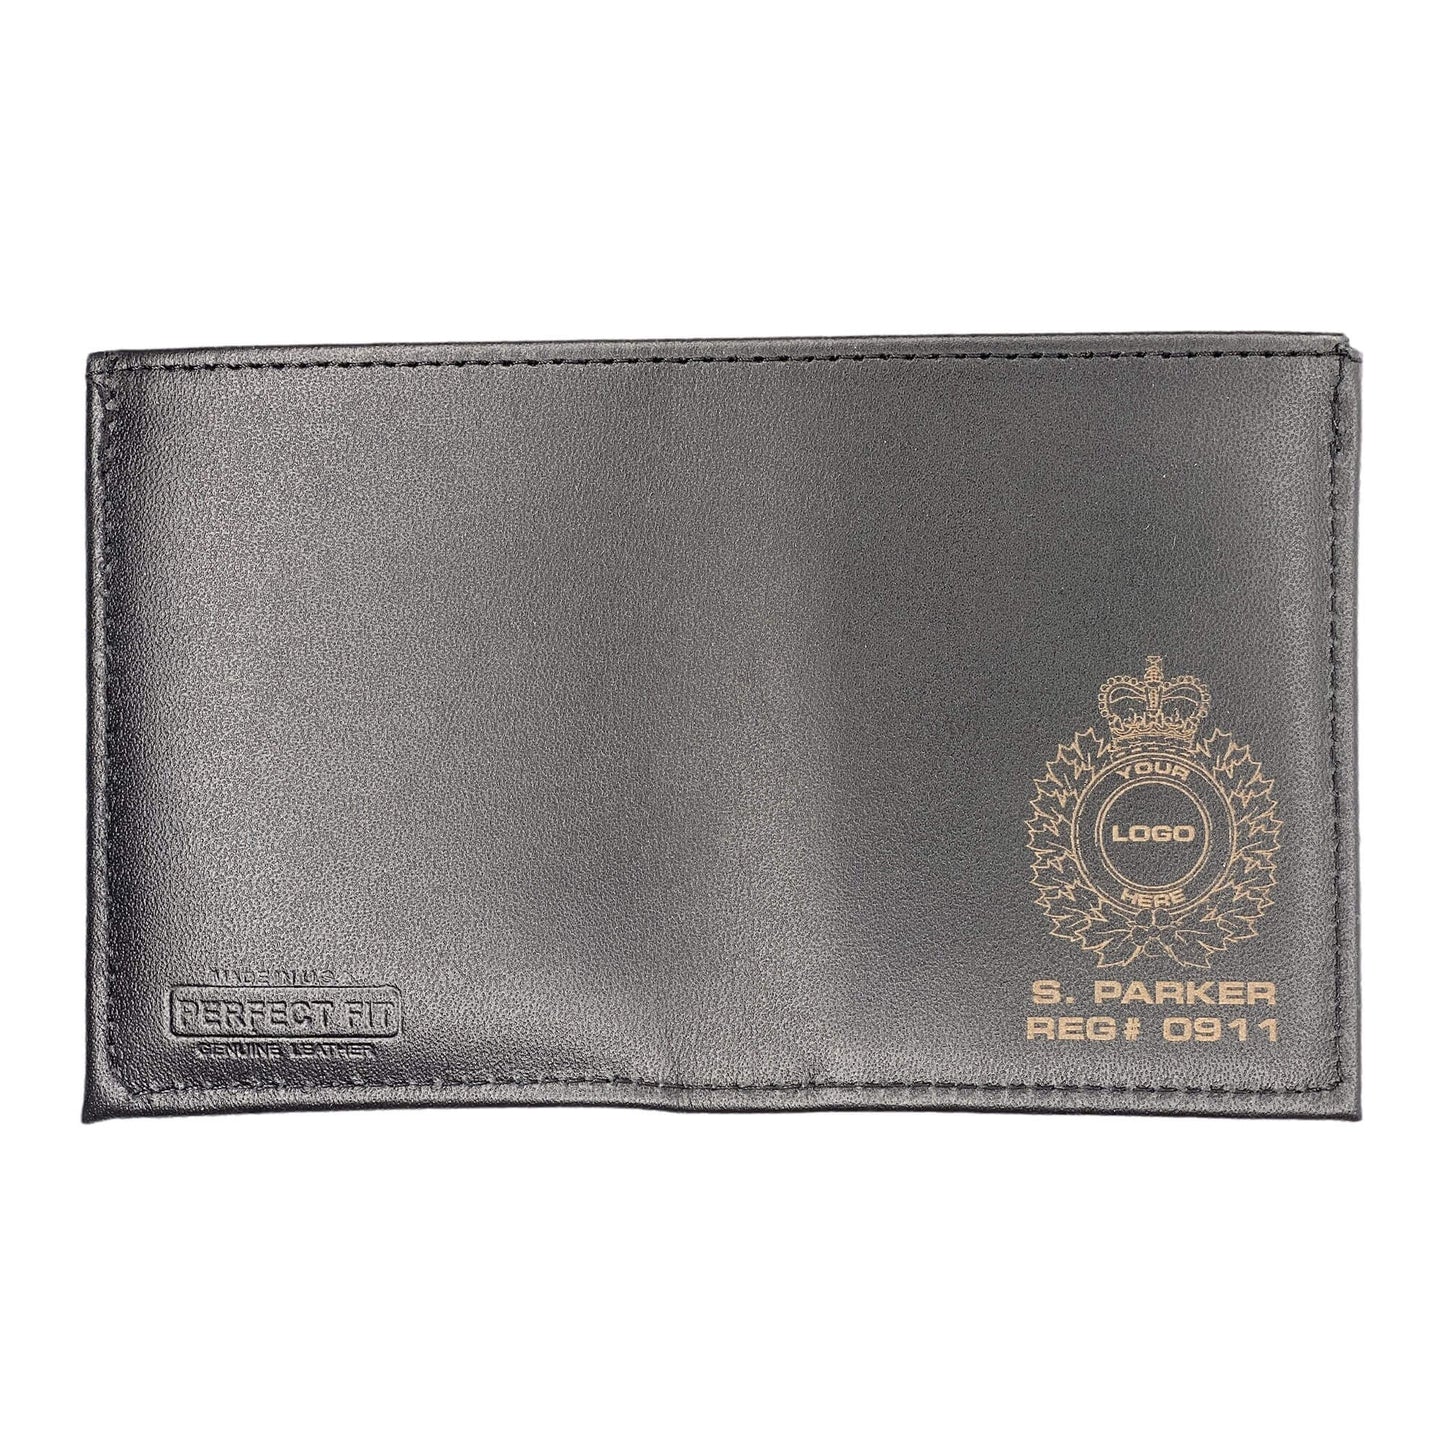 PPS-SPP Parliamentary Protective Service Badge Wallet